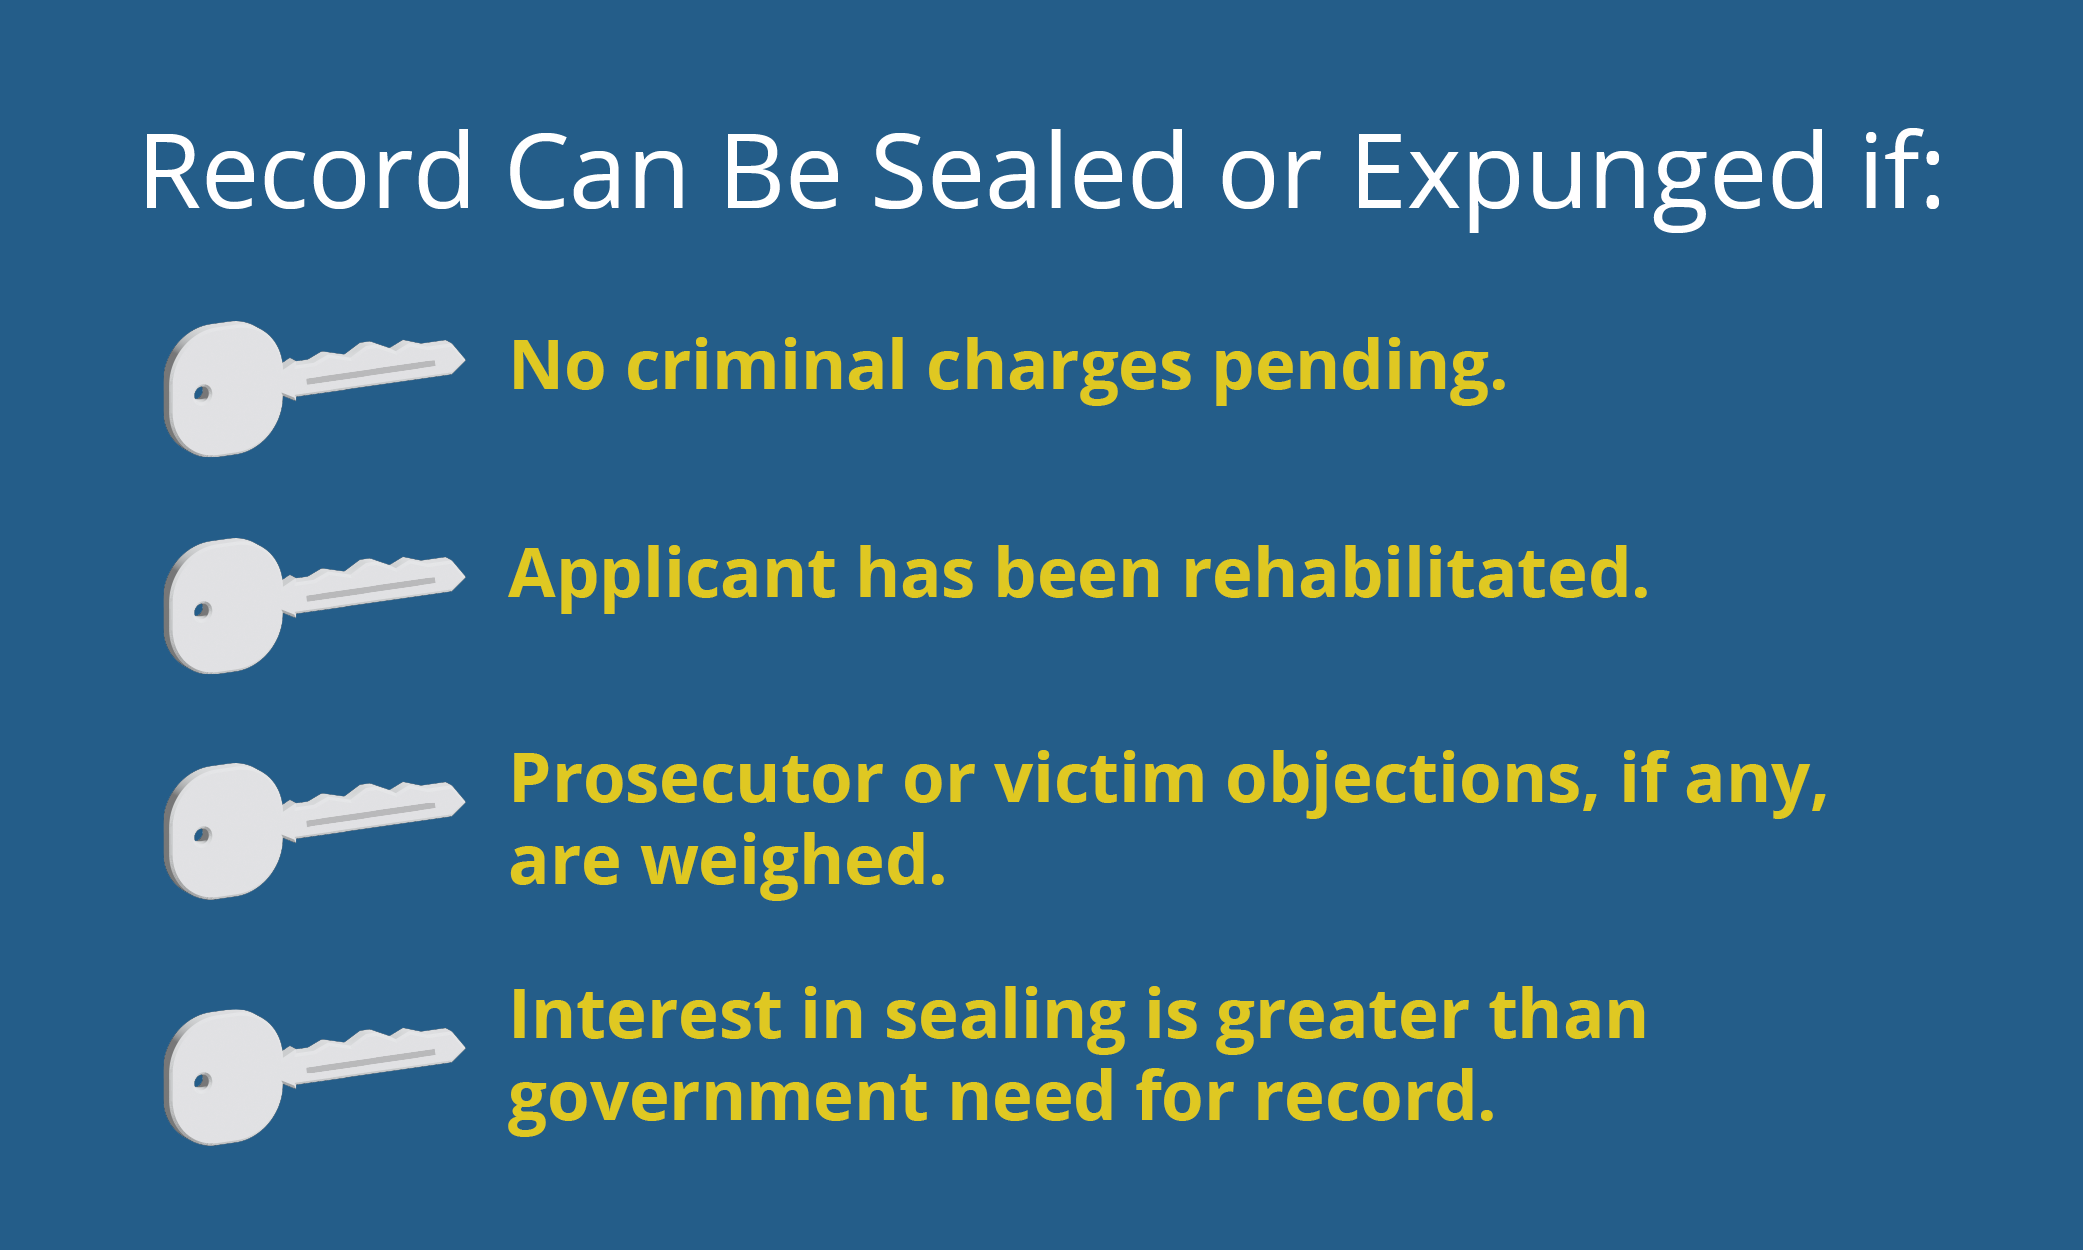 Infographic of a bulleted list of criteria under which records can be sealed or expunged. The bullets are represented by white keys. The infographic reads: 'Record can be sealed or expunged if: no criminal charges pending, applicant has been rehabilitated, prosecutor or victim objections, if any, are weighed, and interest in sealing is greater than government need for record.'